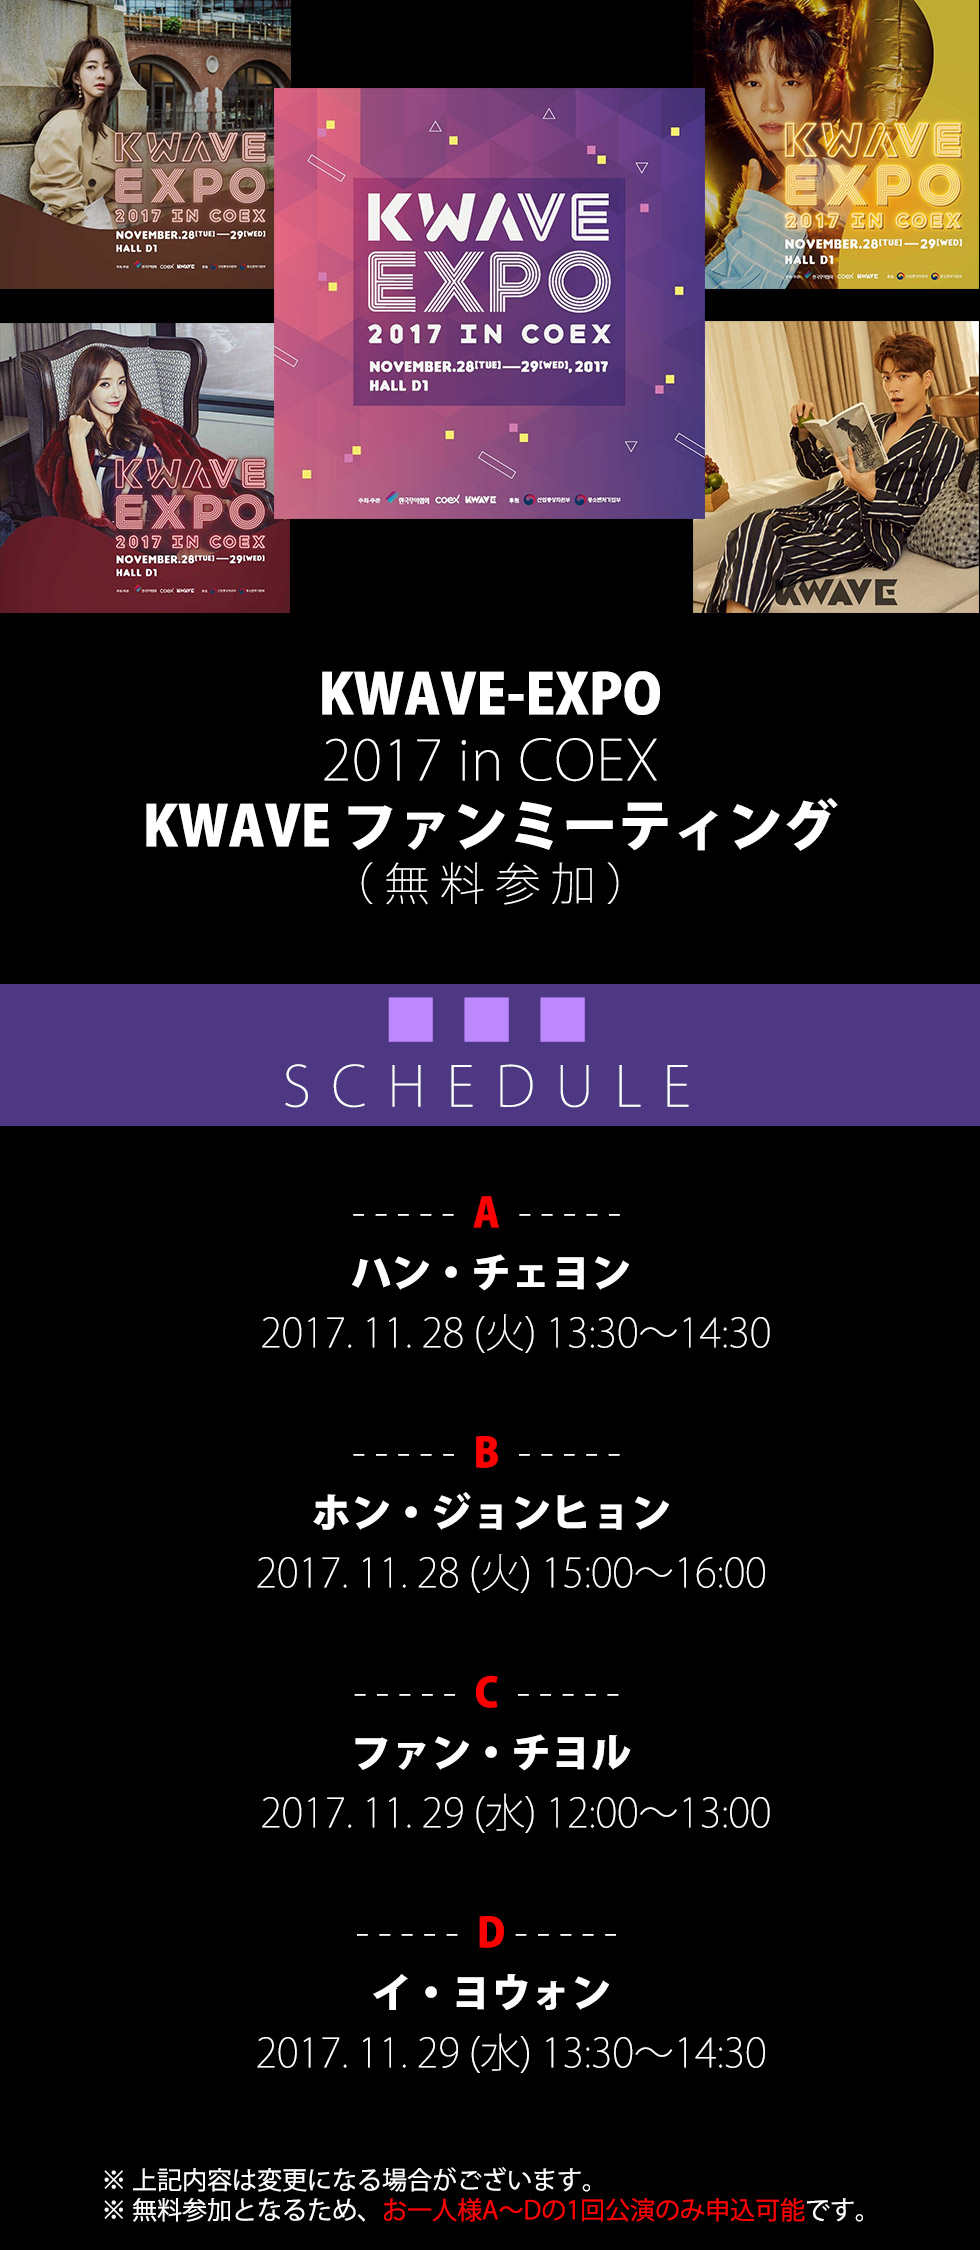 2017 KWAVE-EXPO 2017 in COEX KWAVE ファンミーティング